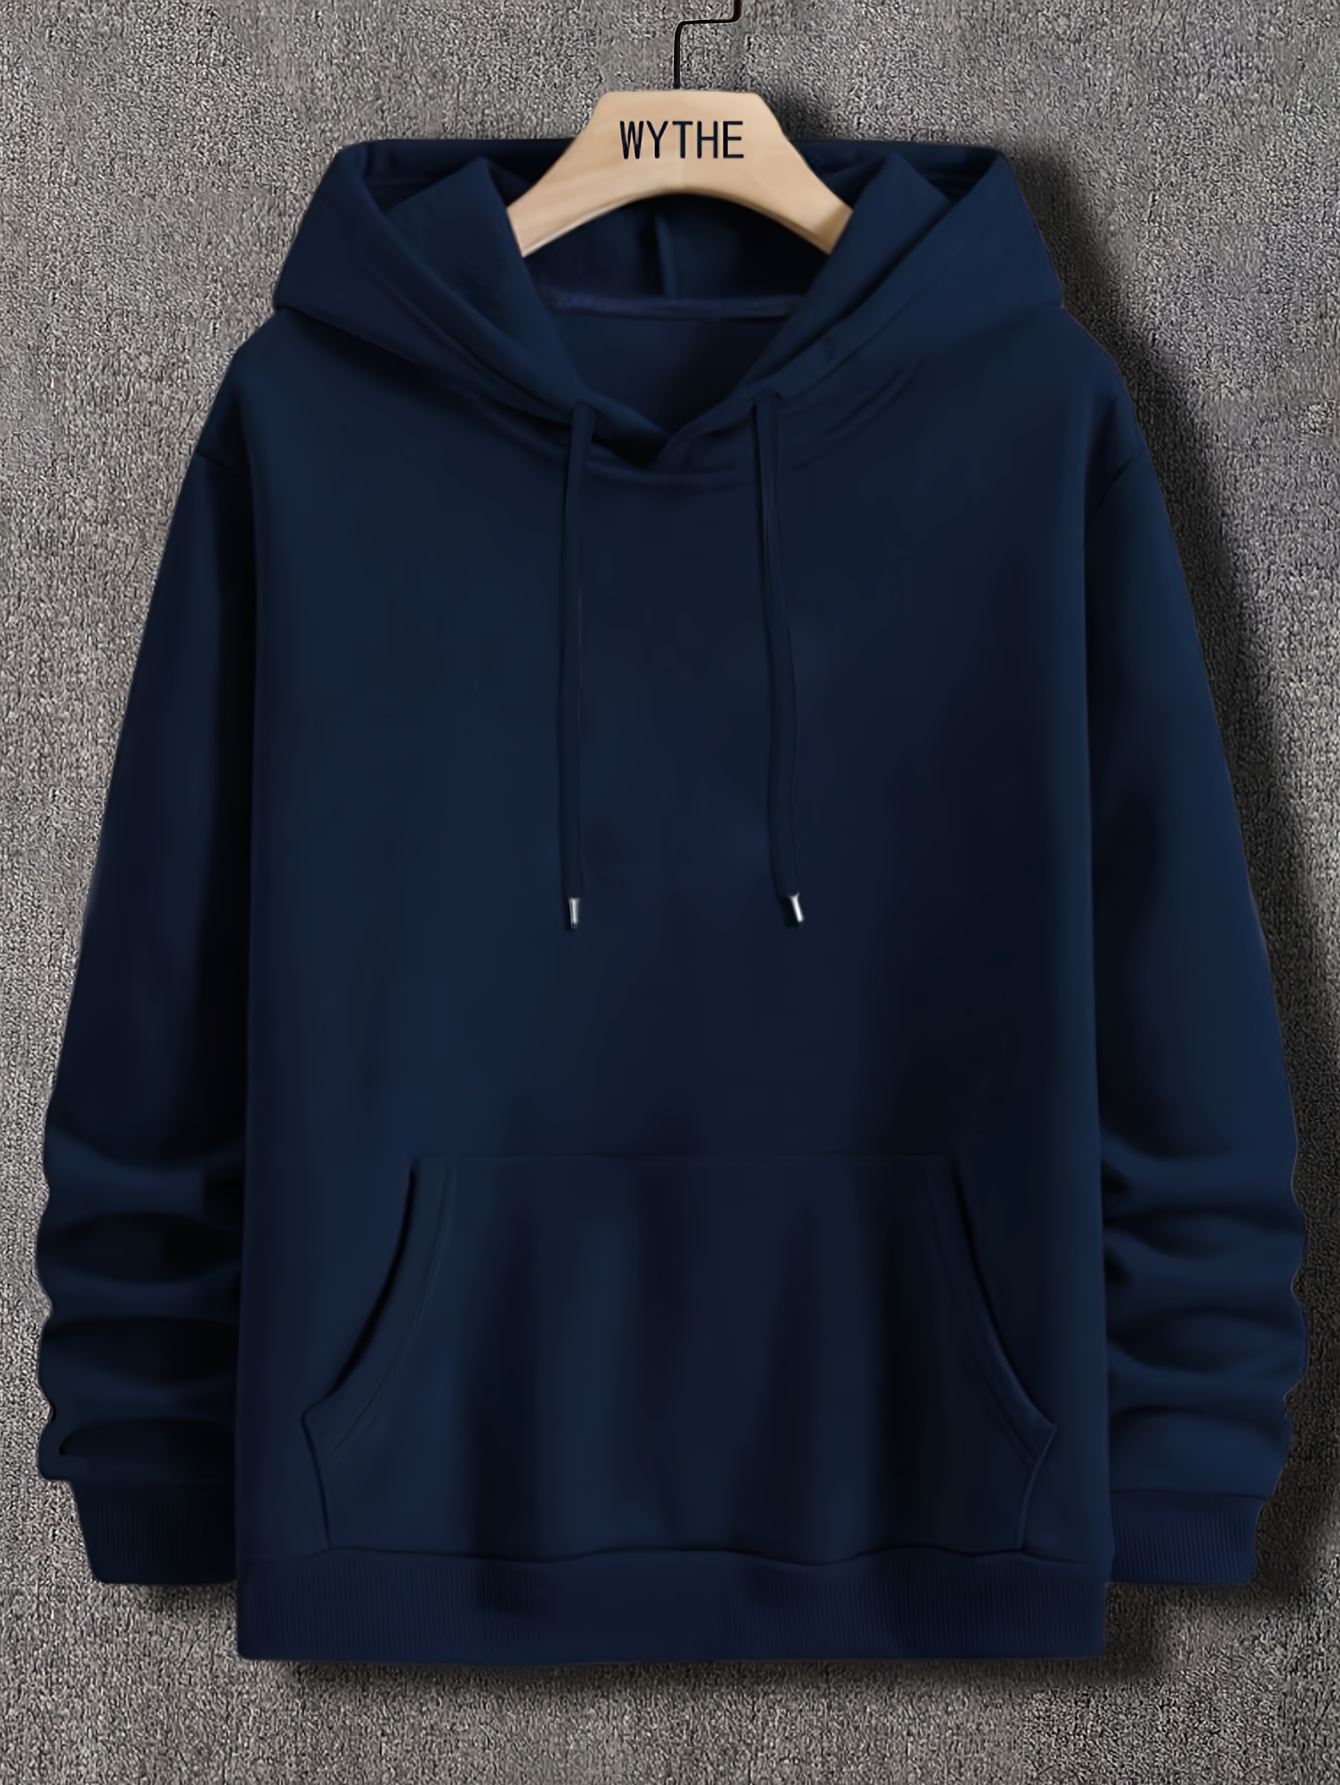 solid color hoodies, solid color hoodies for men graphic hoodie with kangaroo pocket comfy loose drawstring trendy hooded pullover mens clothing for autumn winter details 5